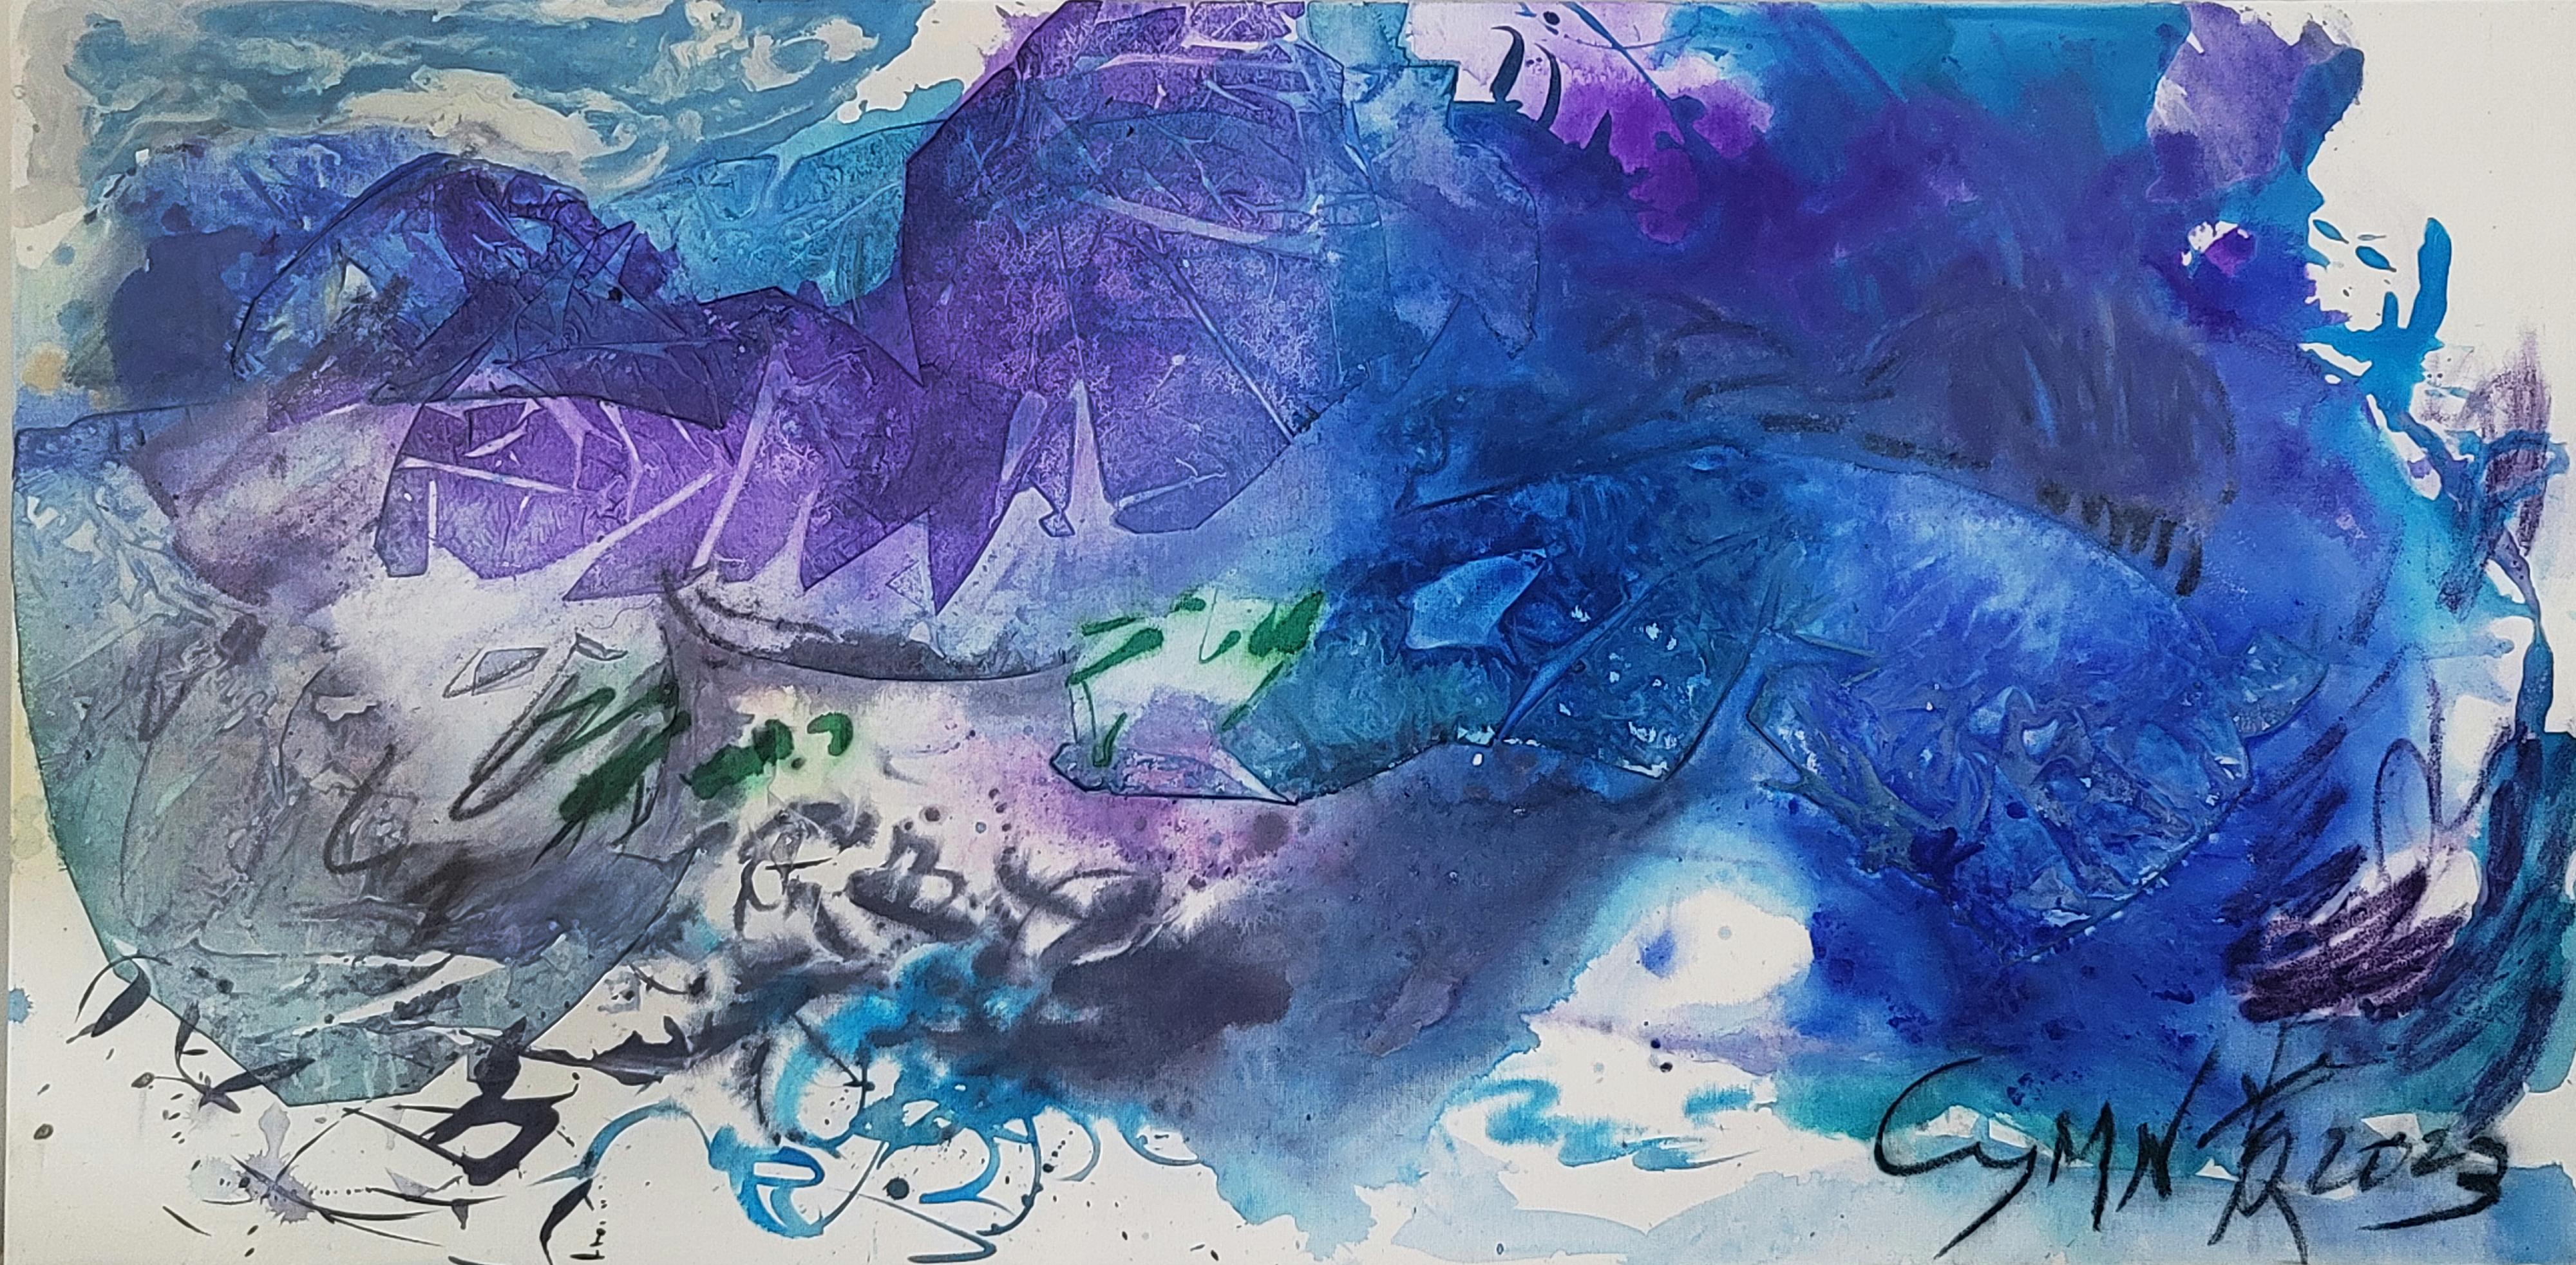 Resilience in Solitude - Energetic, Expressive Abstract, Zen Calligraphy - Painting by Cymn Wong 